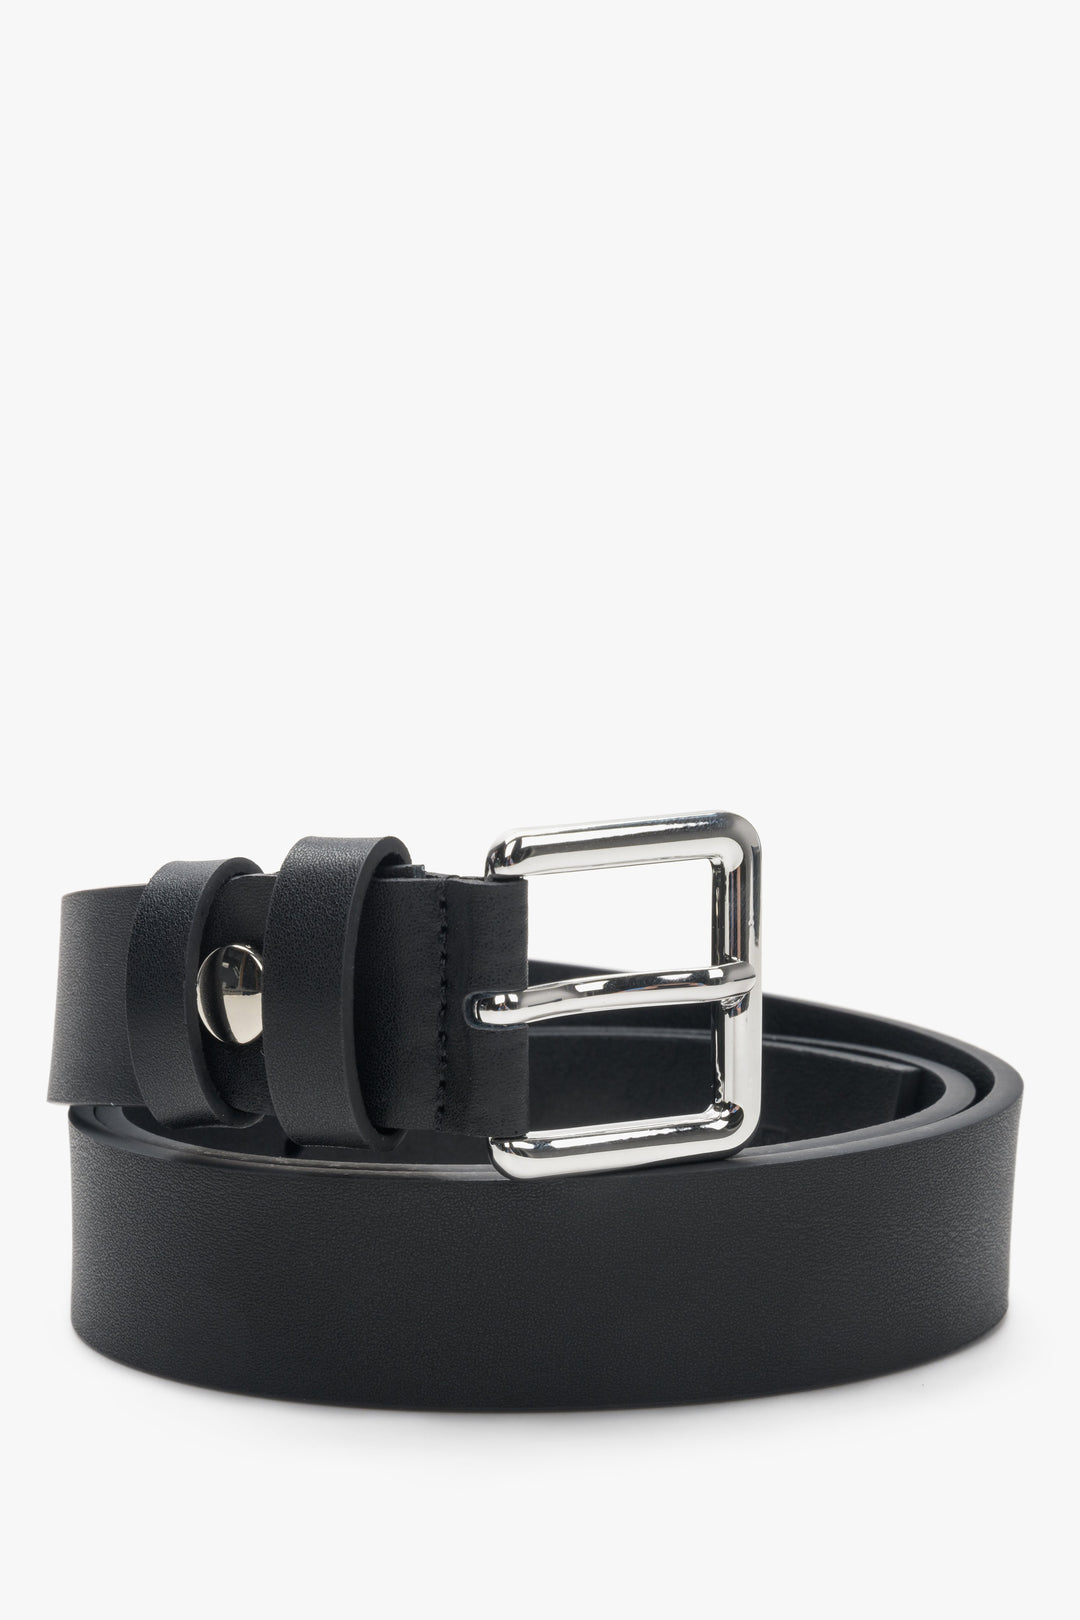 Black Women's Leather Belt with Silver Buckle and Tapered End Estro ER00113197.